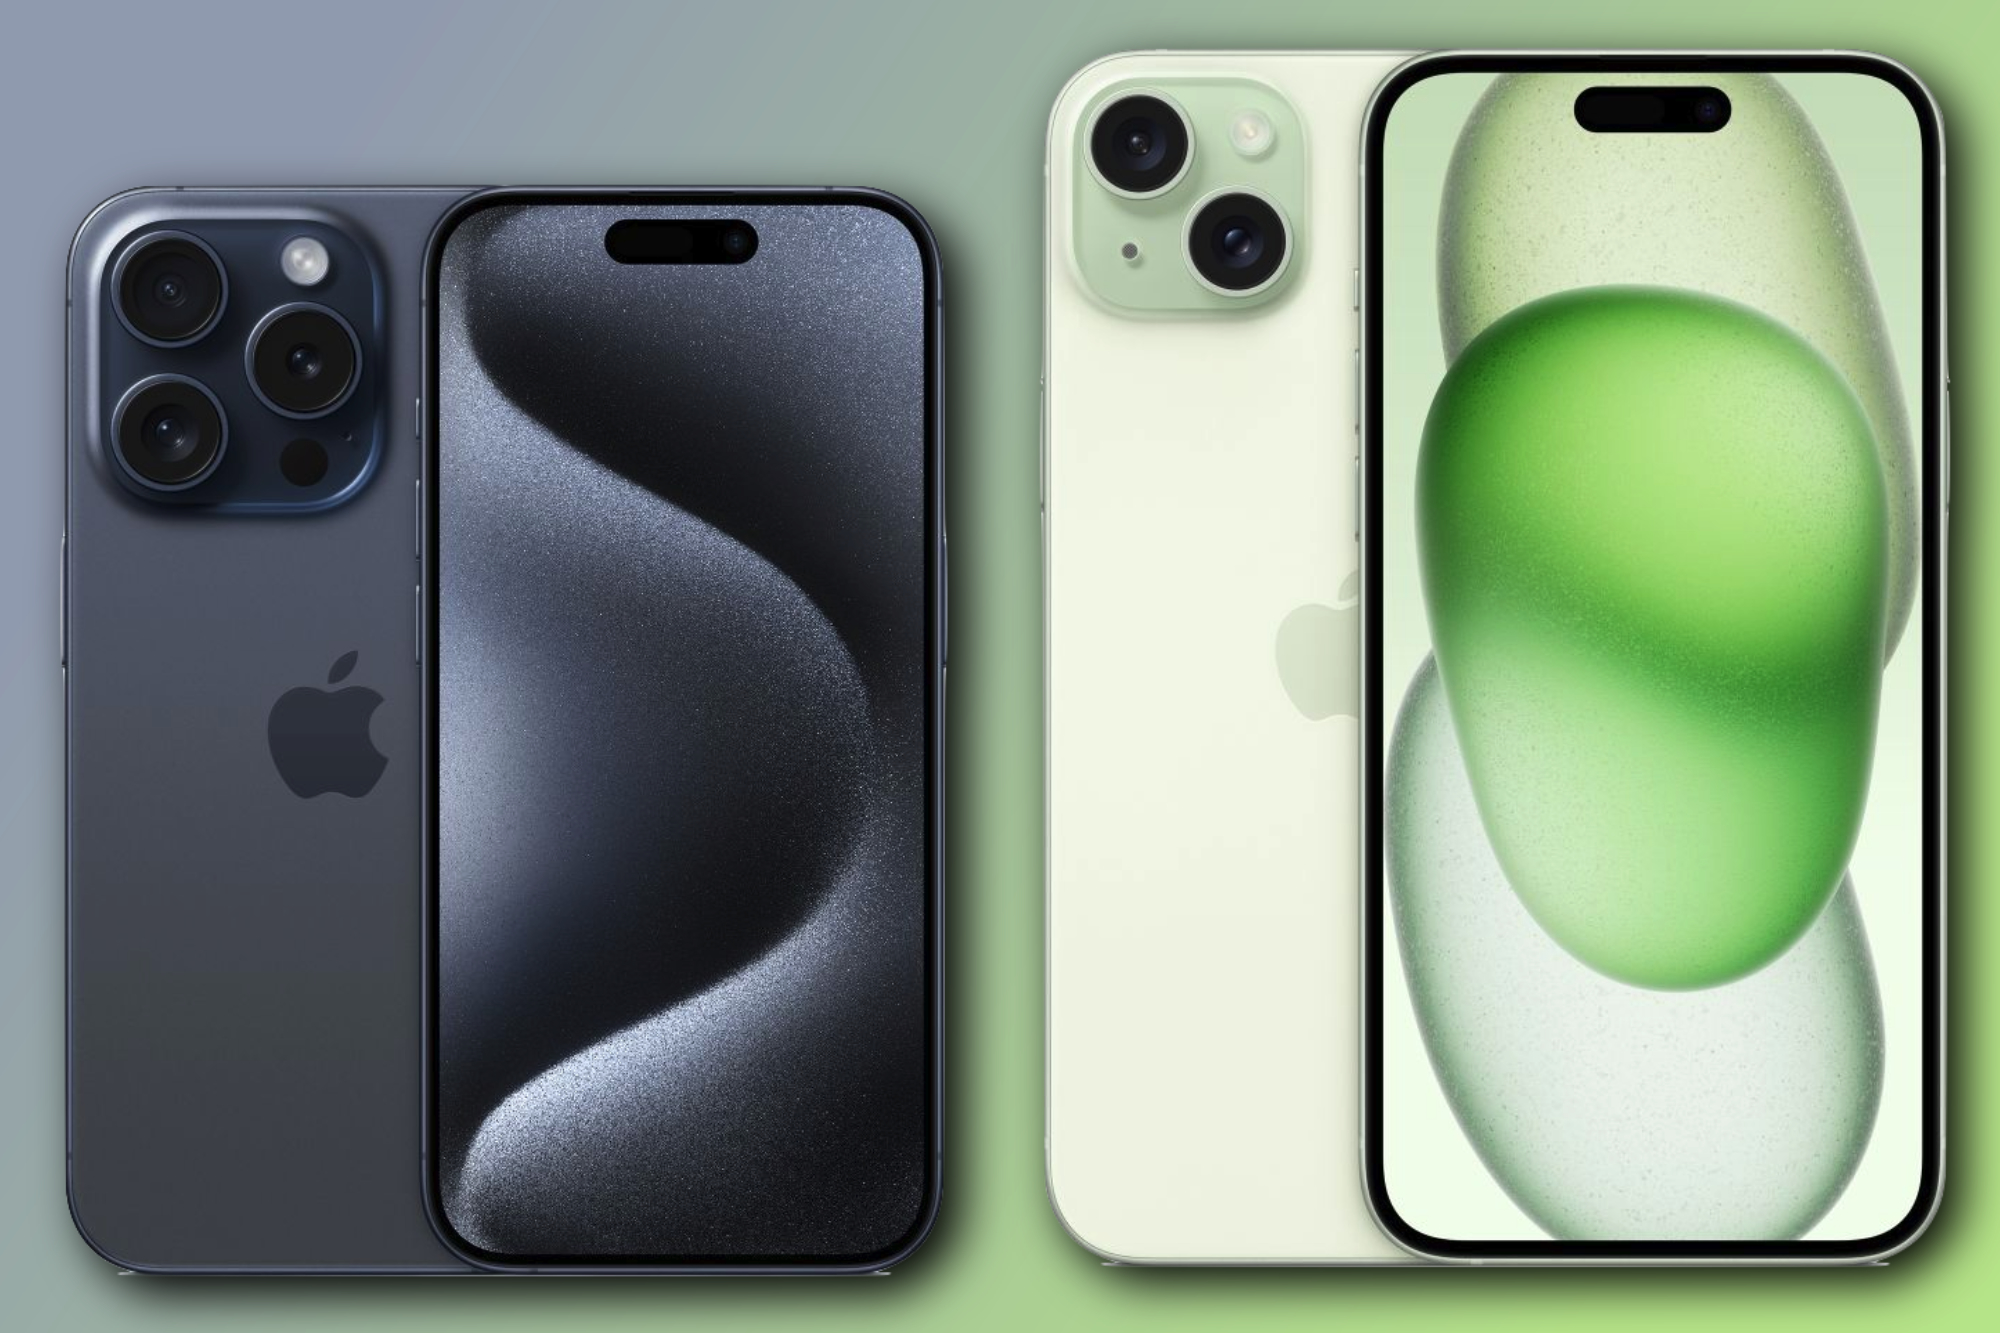 Renders of the iPhone 15 Pro and iPhone 15 Plus next to each other.